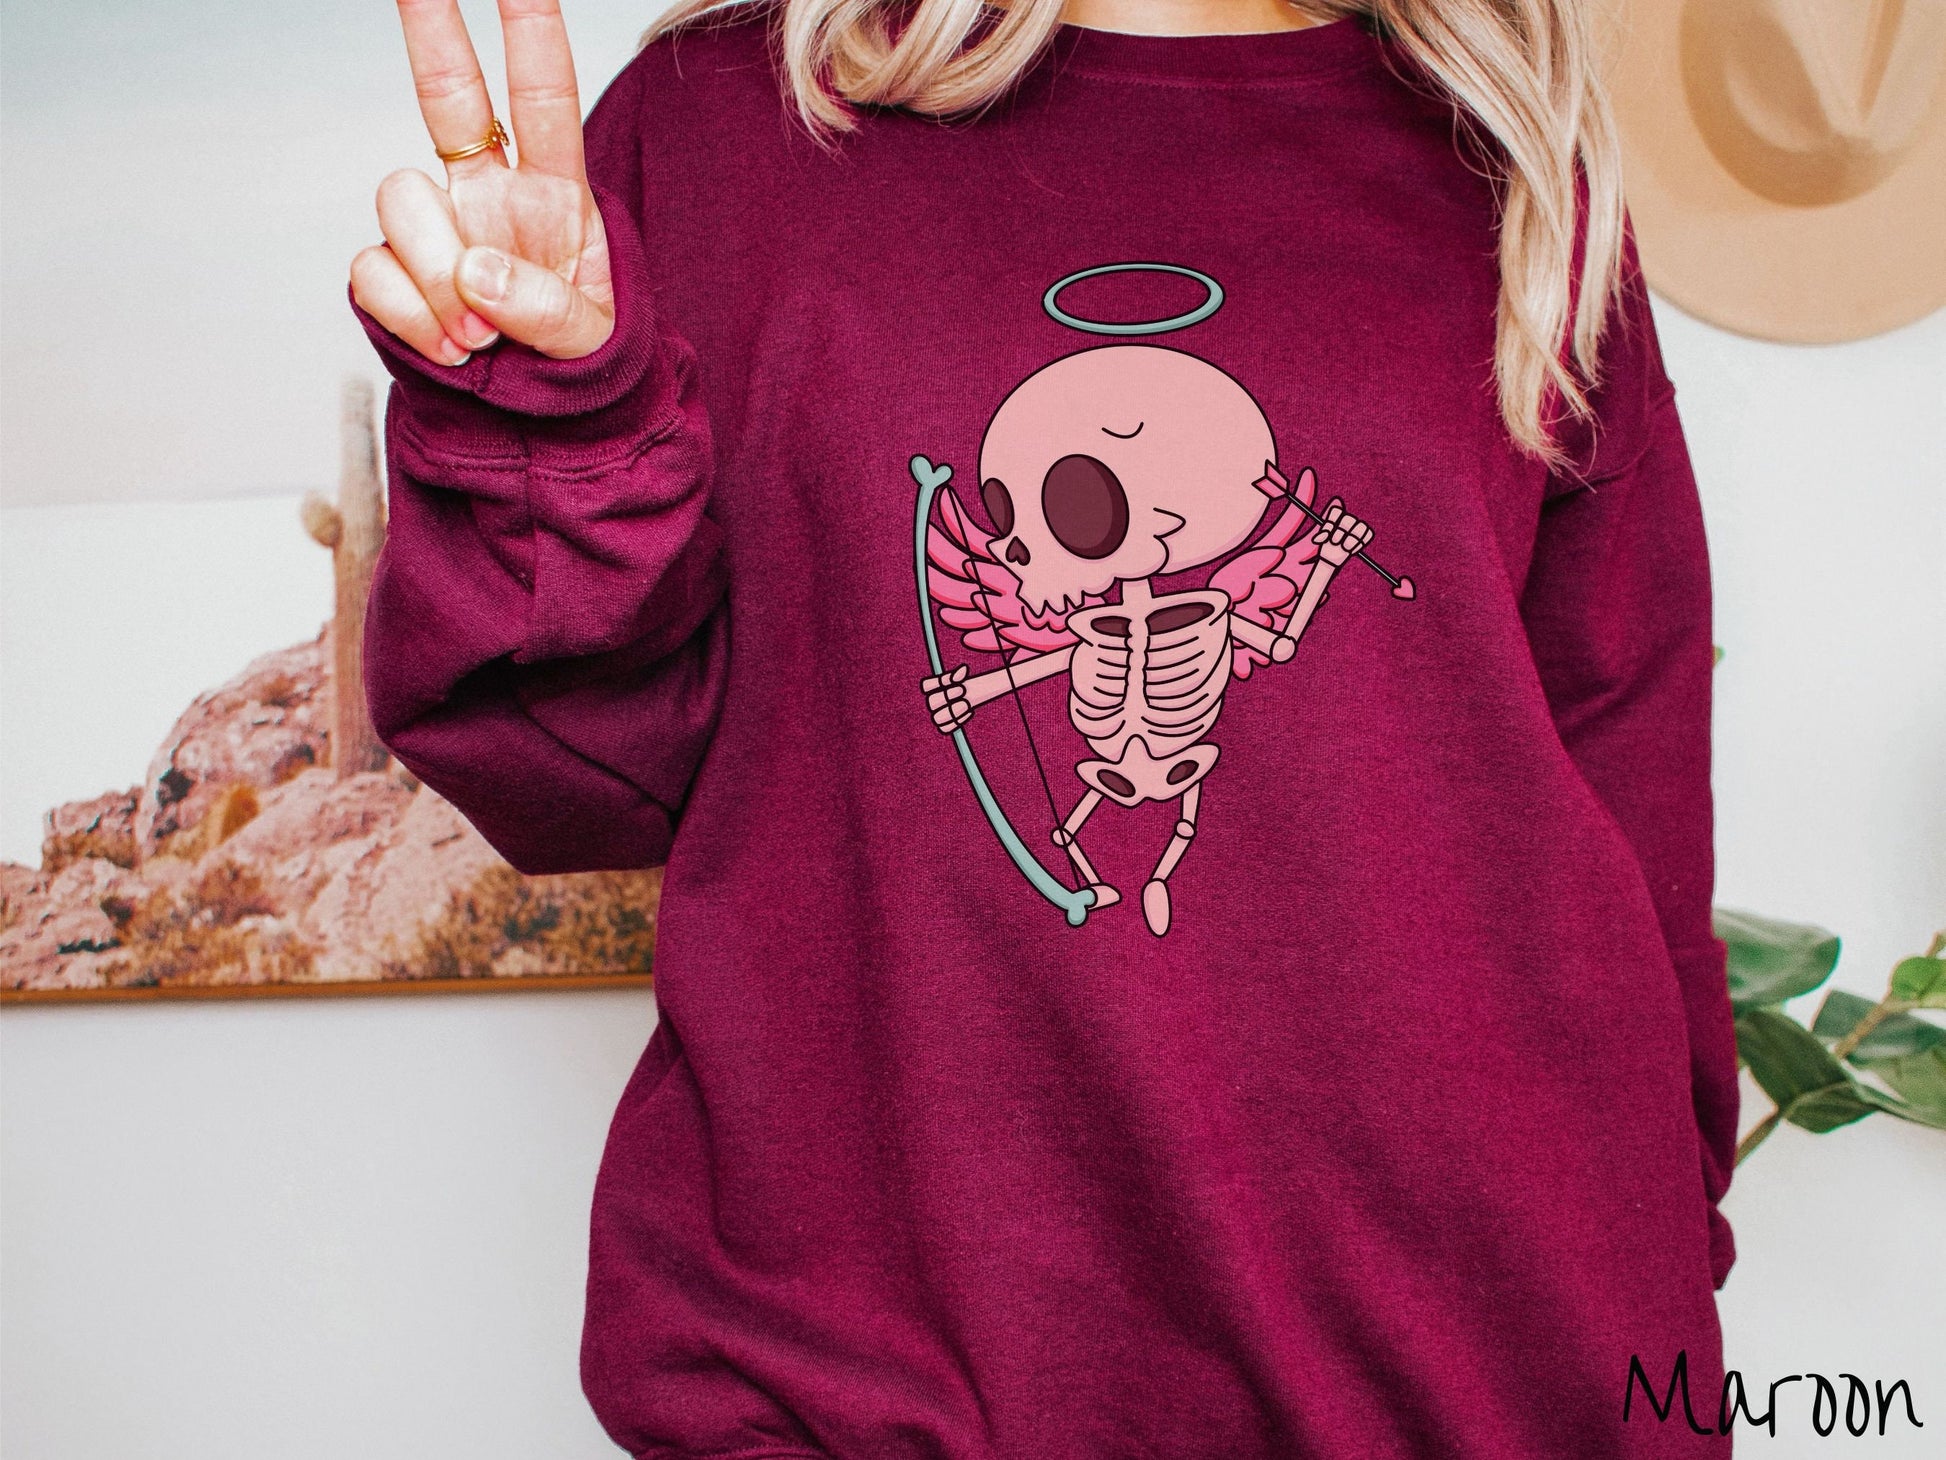 A woman wearing a cute maroon colored sweatshirt with a pink winged baby skeleton cupid with a halo holding a heart-tipped arrow in its left hand and a bow in its right hand.